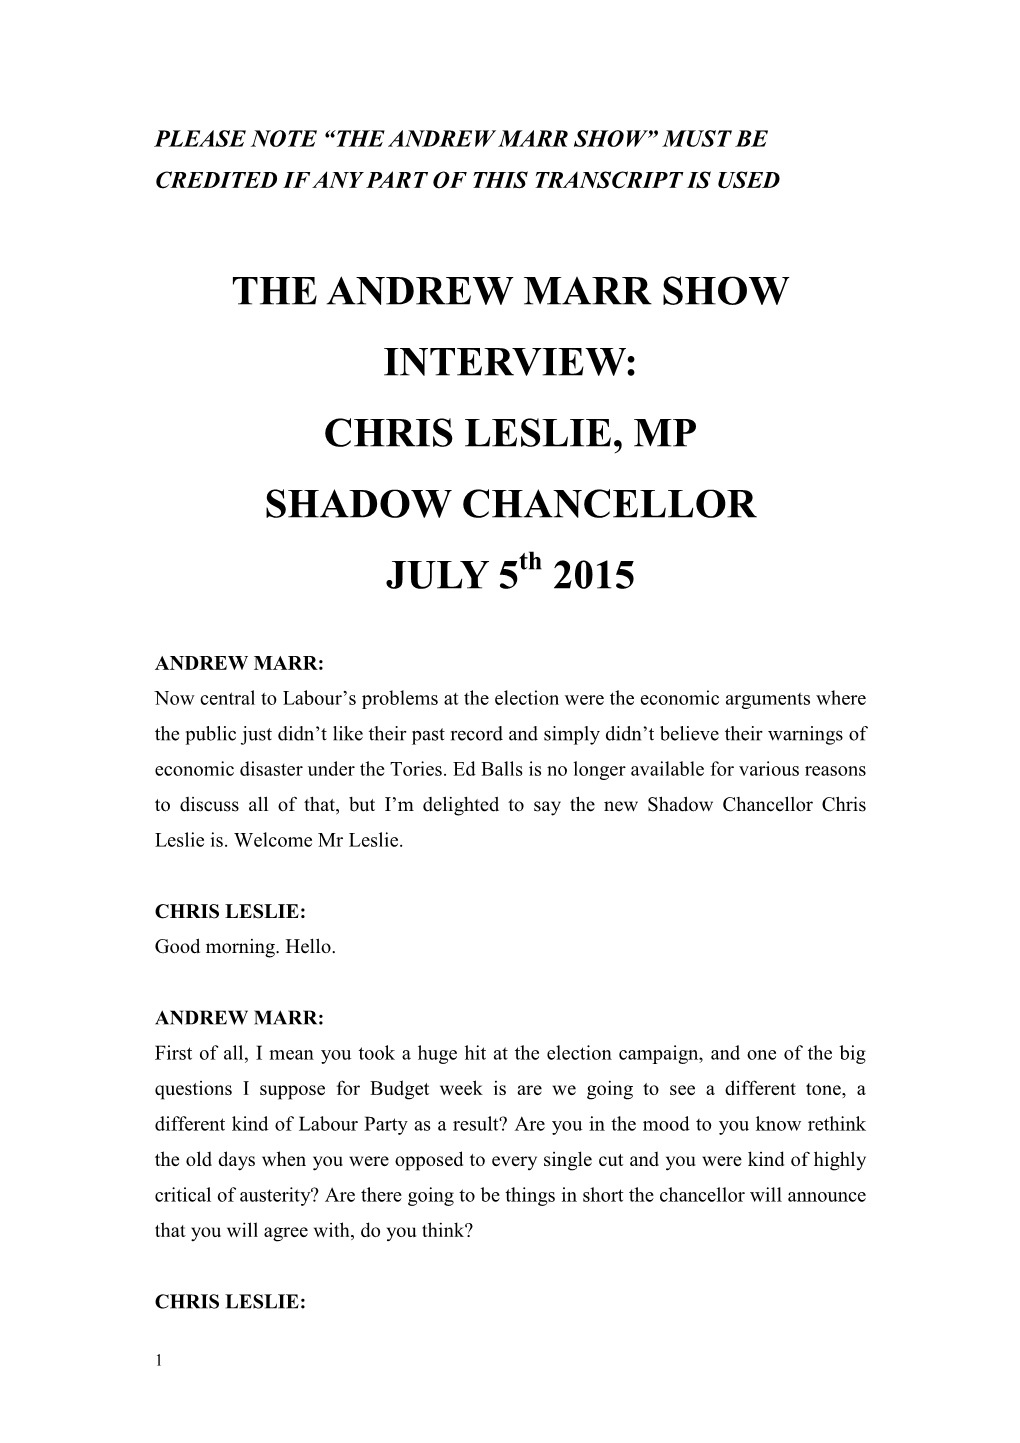 THE ANDREW MARR SHOW INTERVIEW: CHRIS LESLIE, MP SHADOW CHANCELLOR JULY 5Th 2015